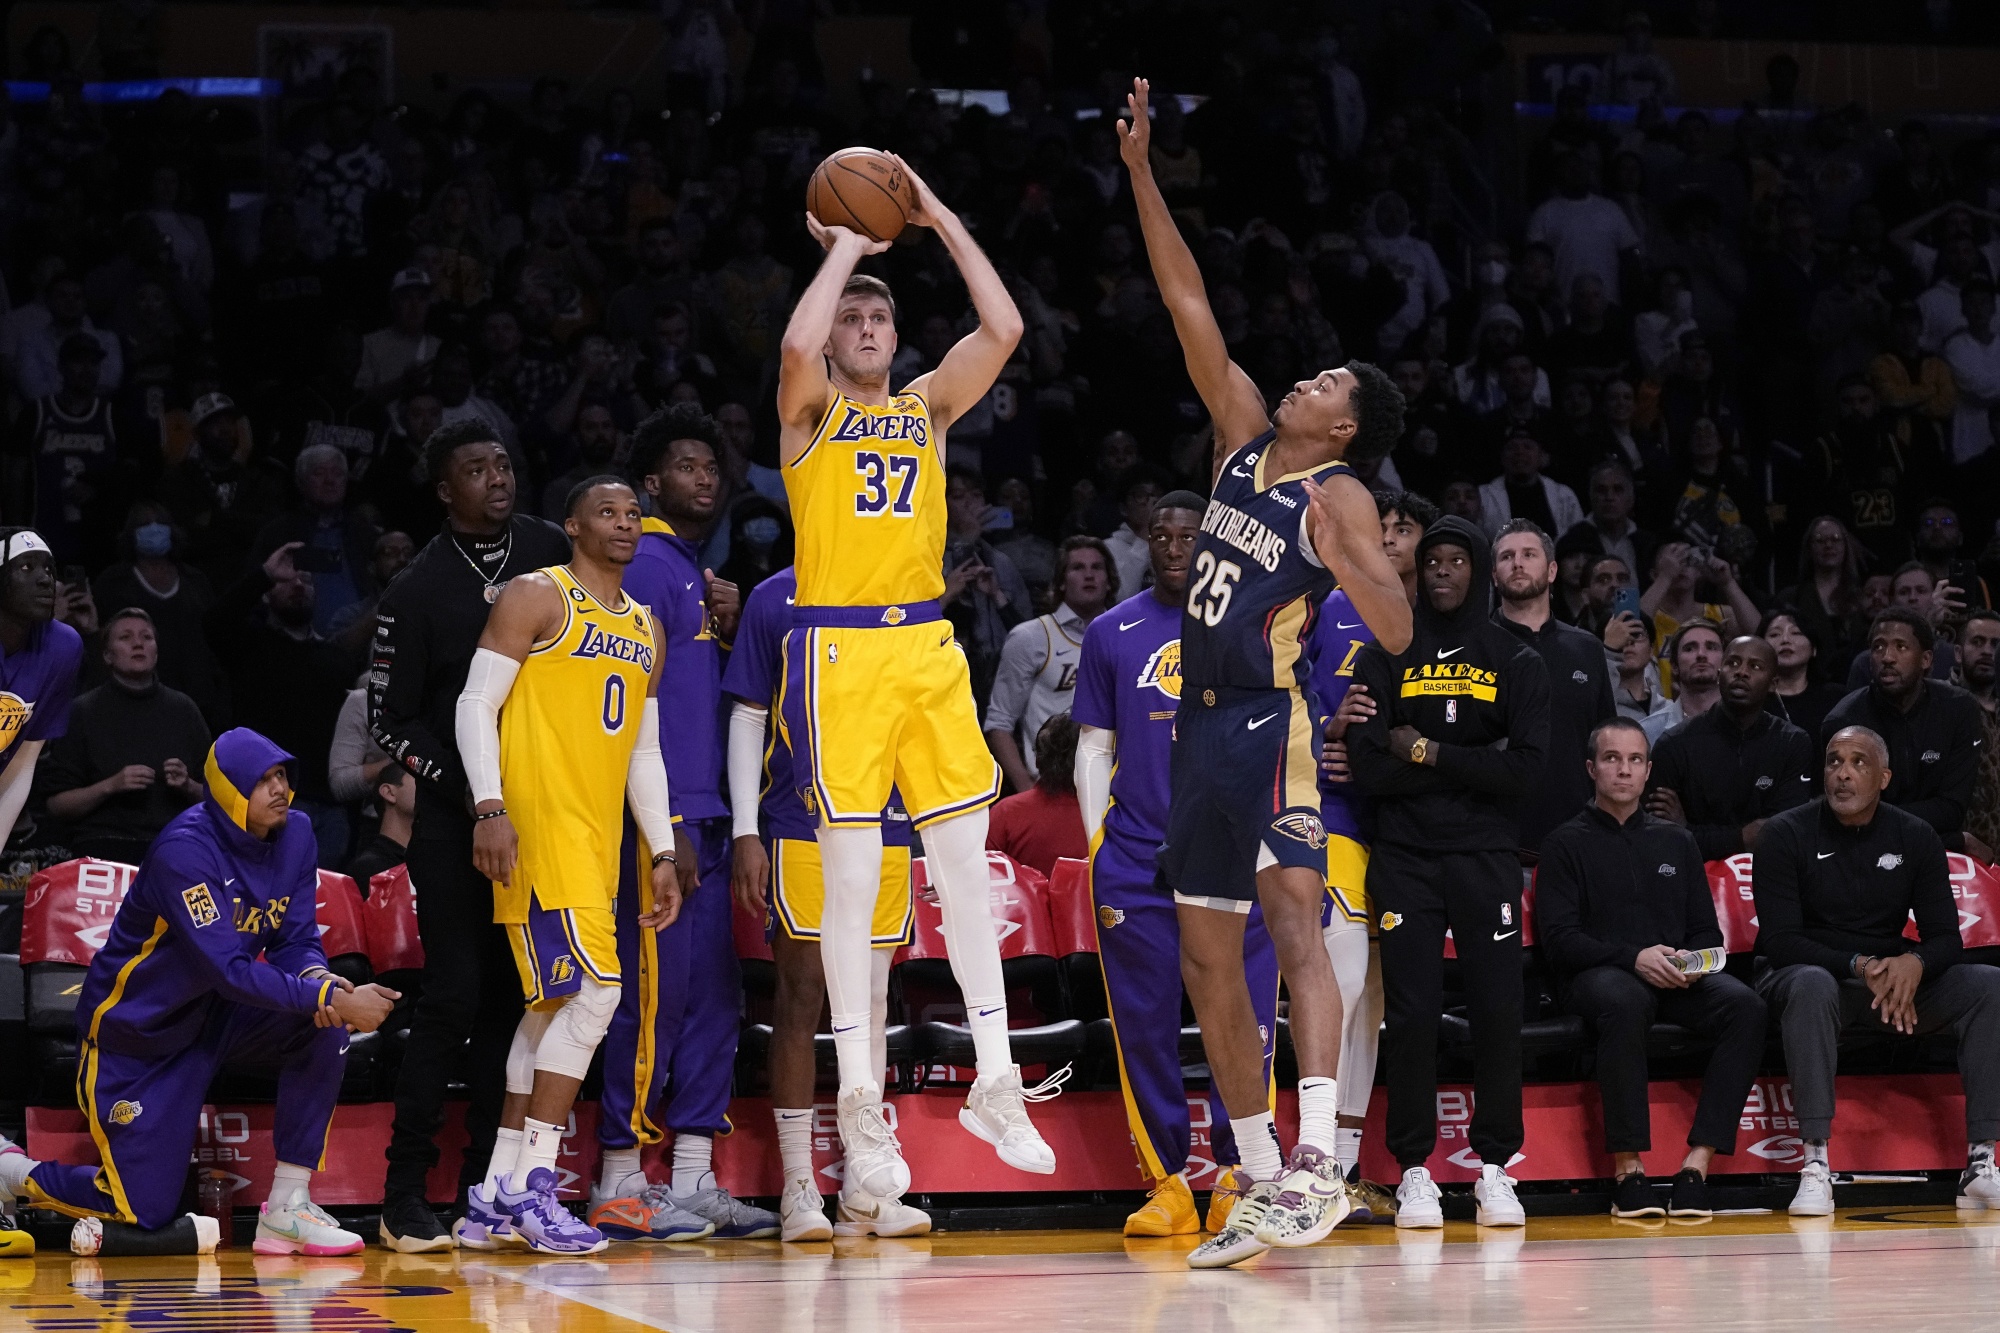 Ryan Forces OT, Lakers Rally for 120-117 Win Over Pelicans